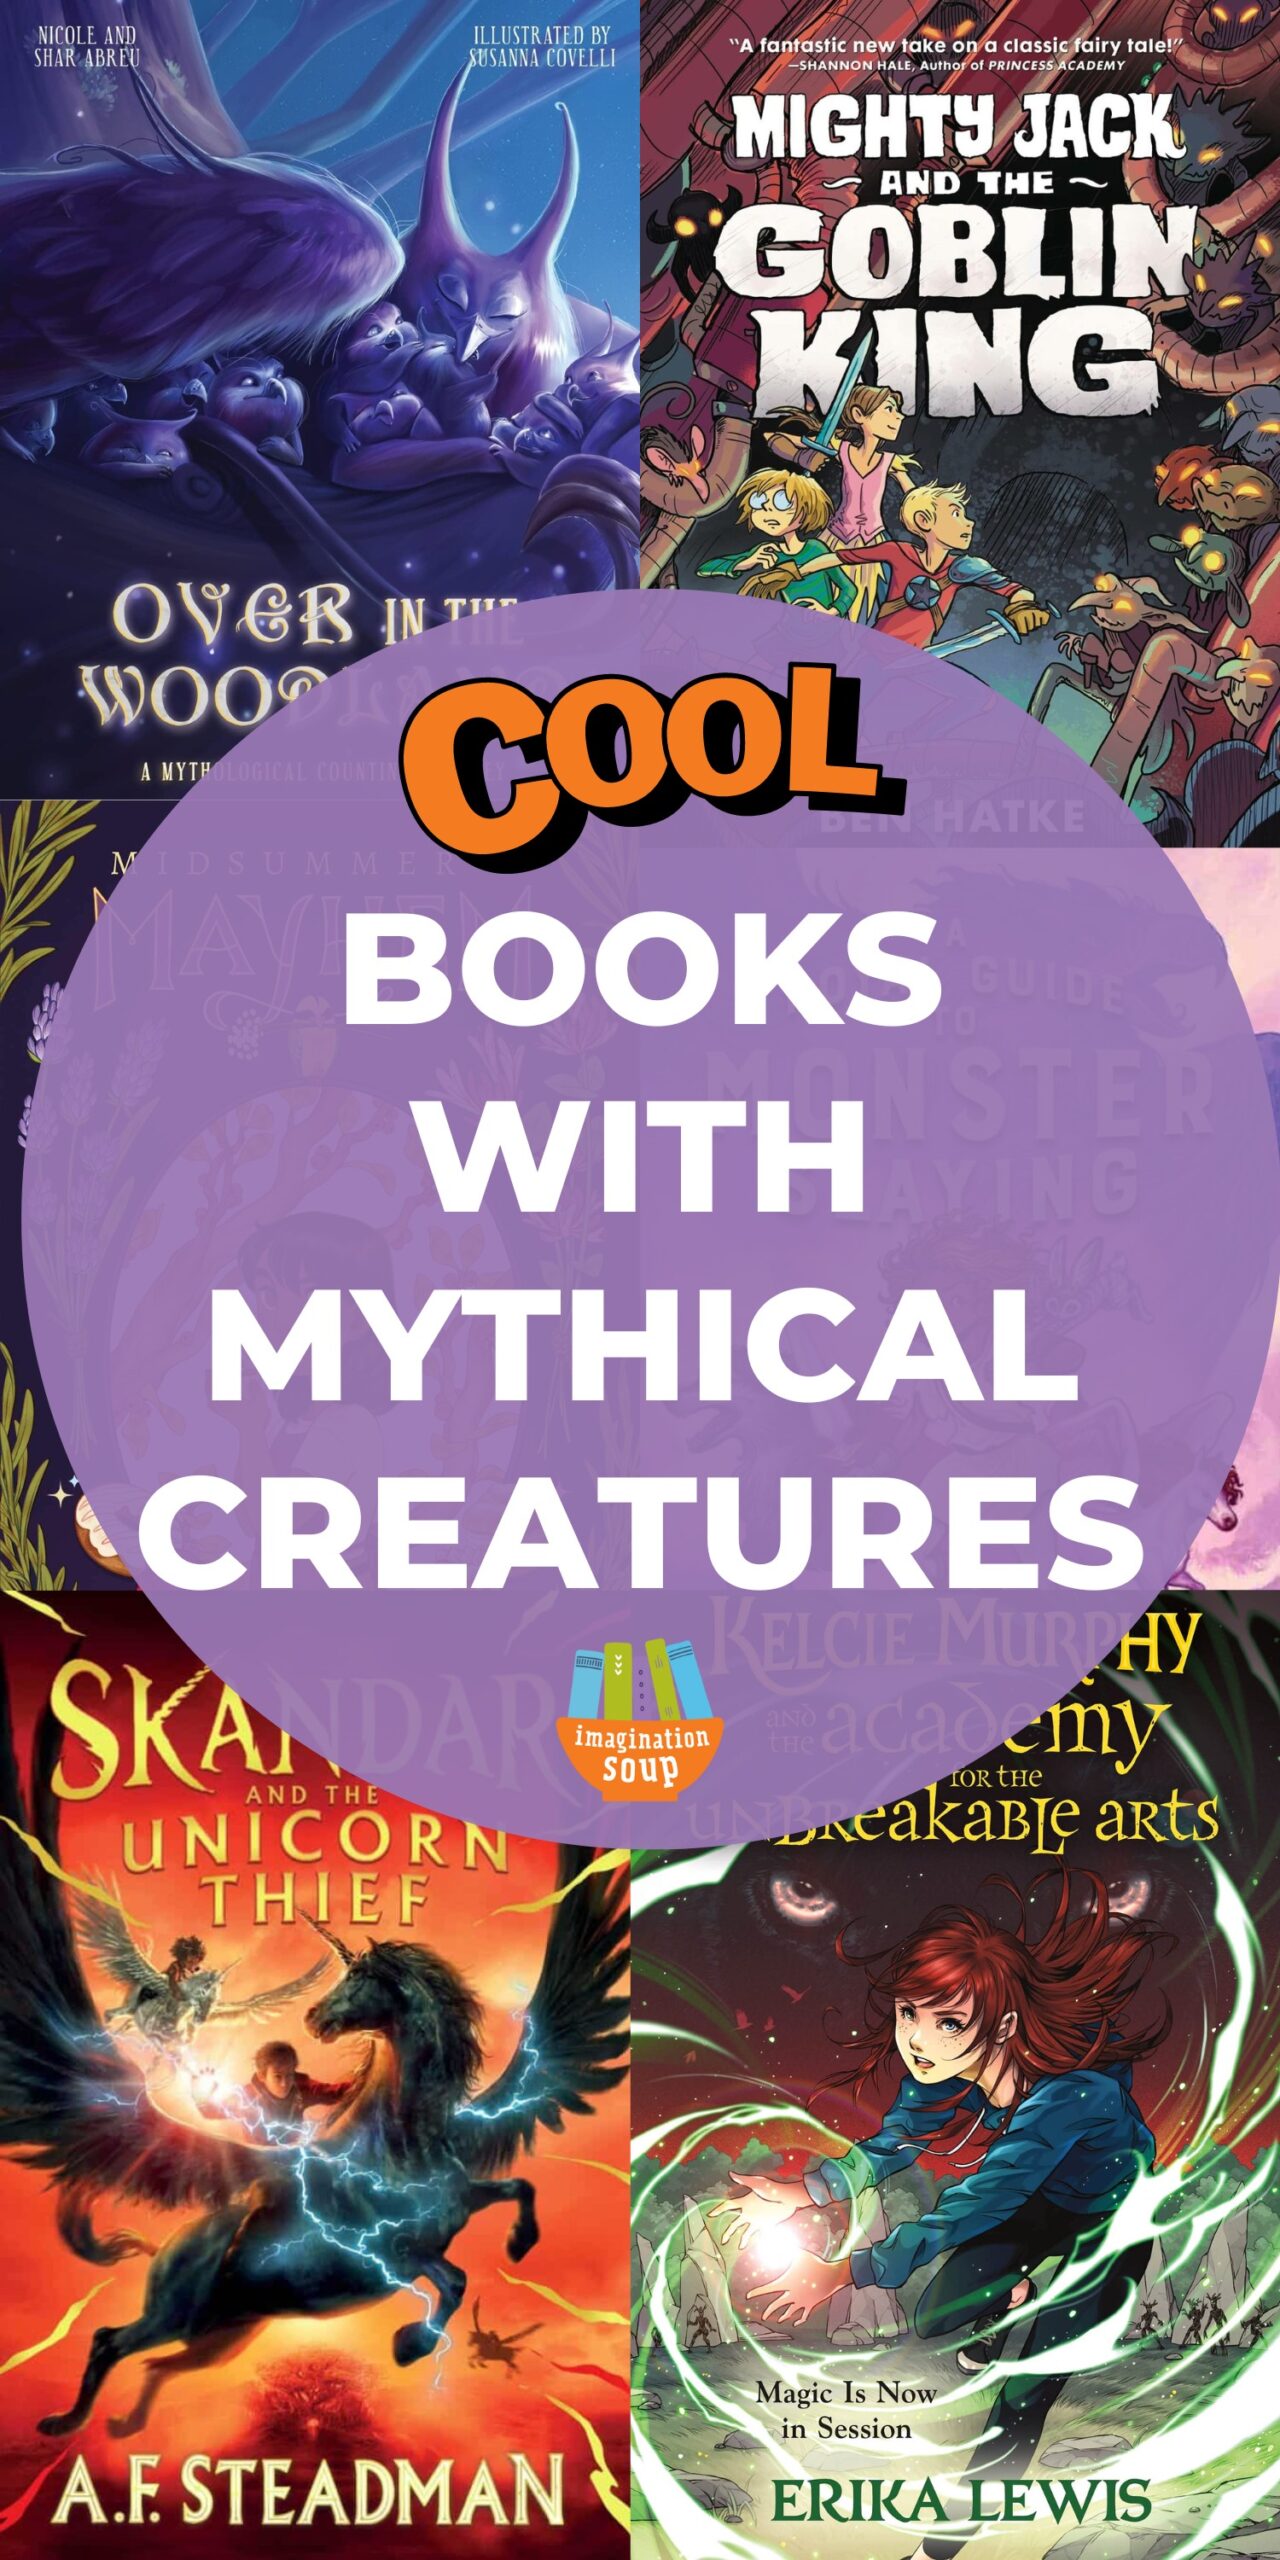 Celebrate mythical creatures of myth and legend in your favorite children's books. Yes! You can find your favorite mythological creatures in magical, fantastical children's books, including picture books, chapter books, and middle grade books. Maybe you'll discover a new favorite book and mythical creature!